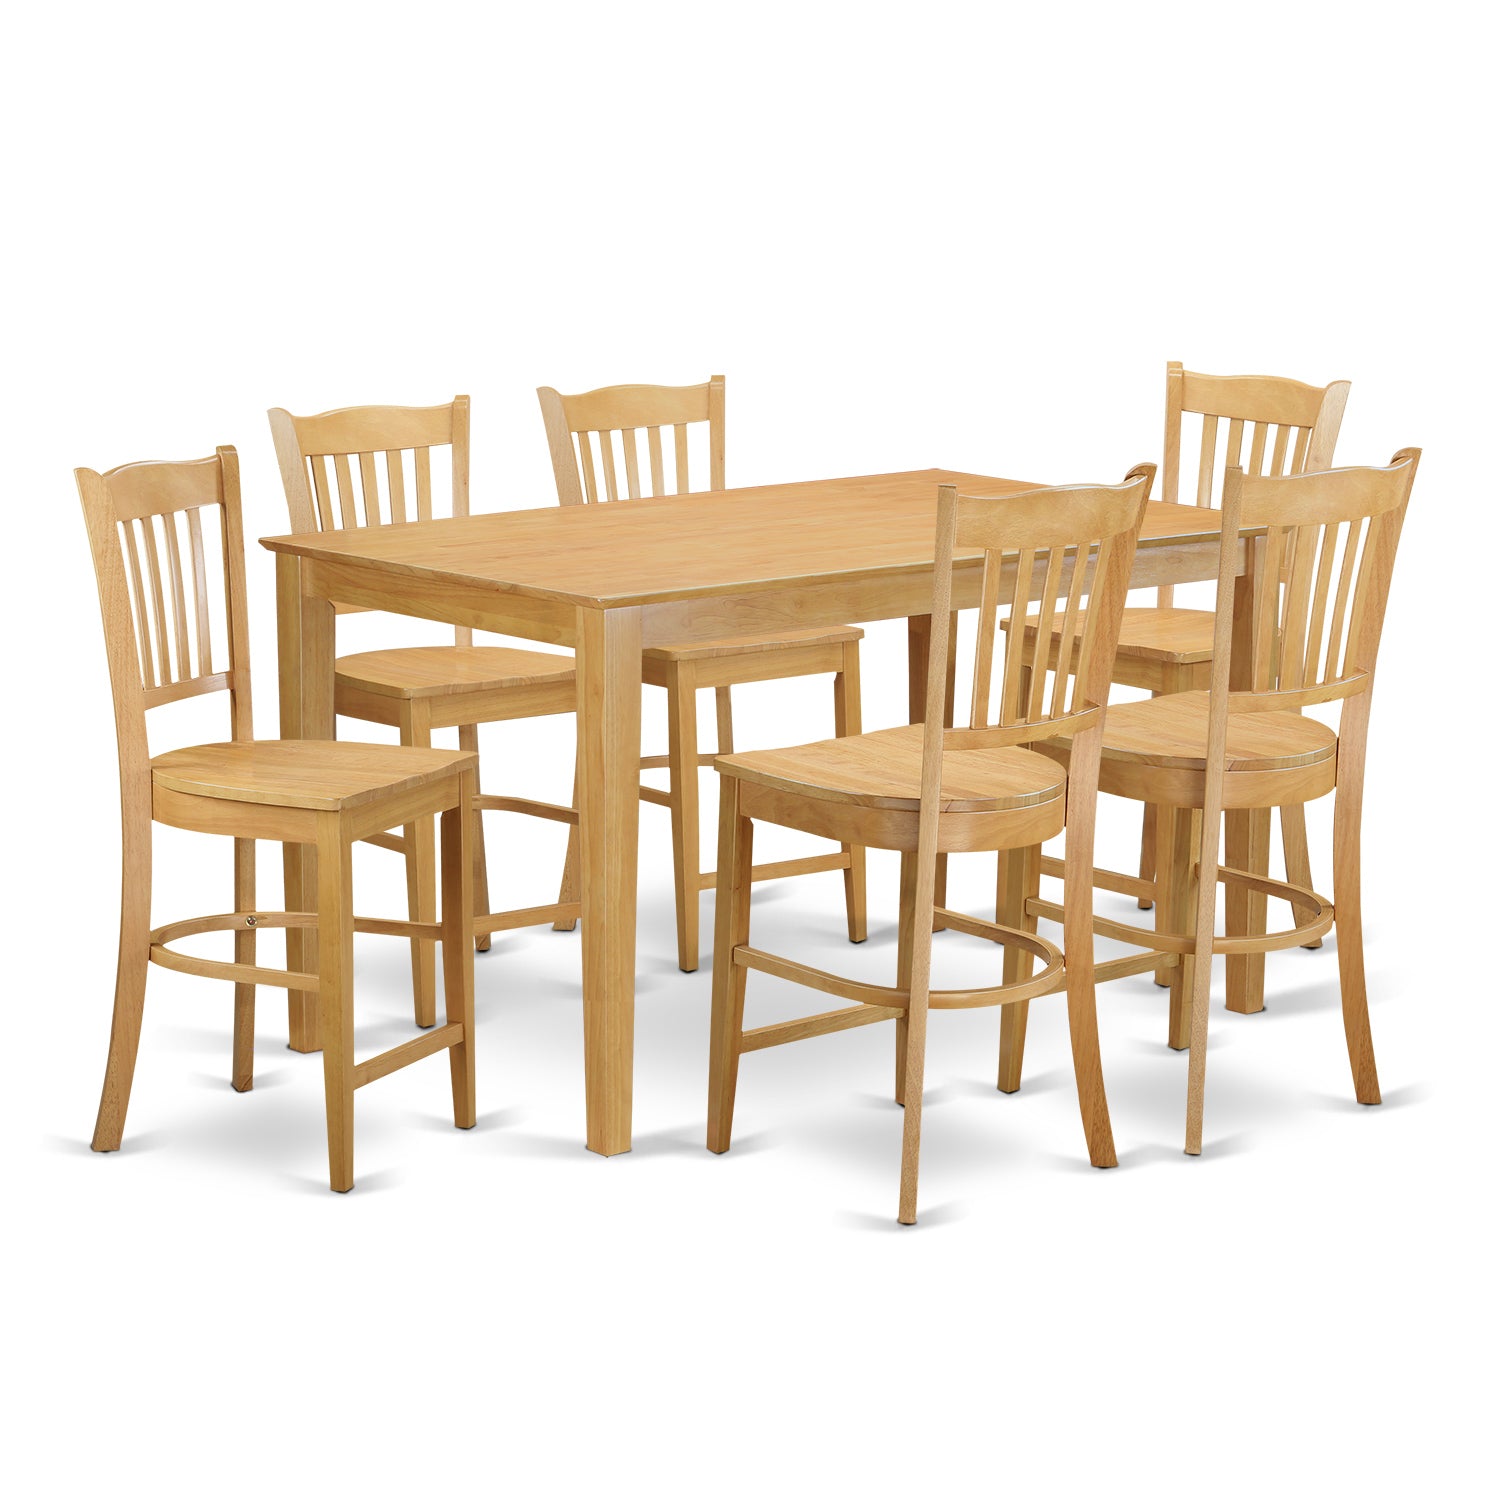 CAGR7H-OAK-W 7 Pc counter height pub set - high top Table and 6 counter height Dining chair.